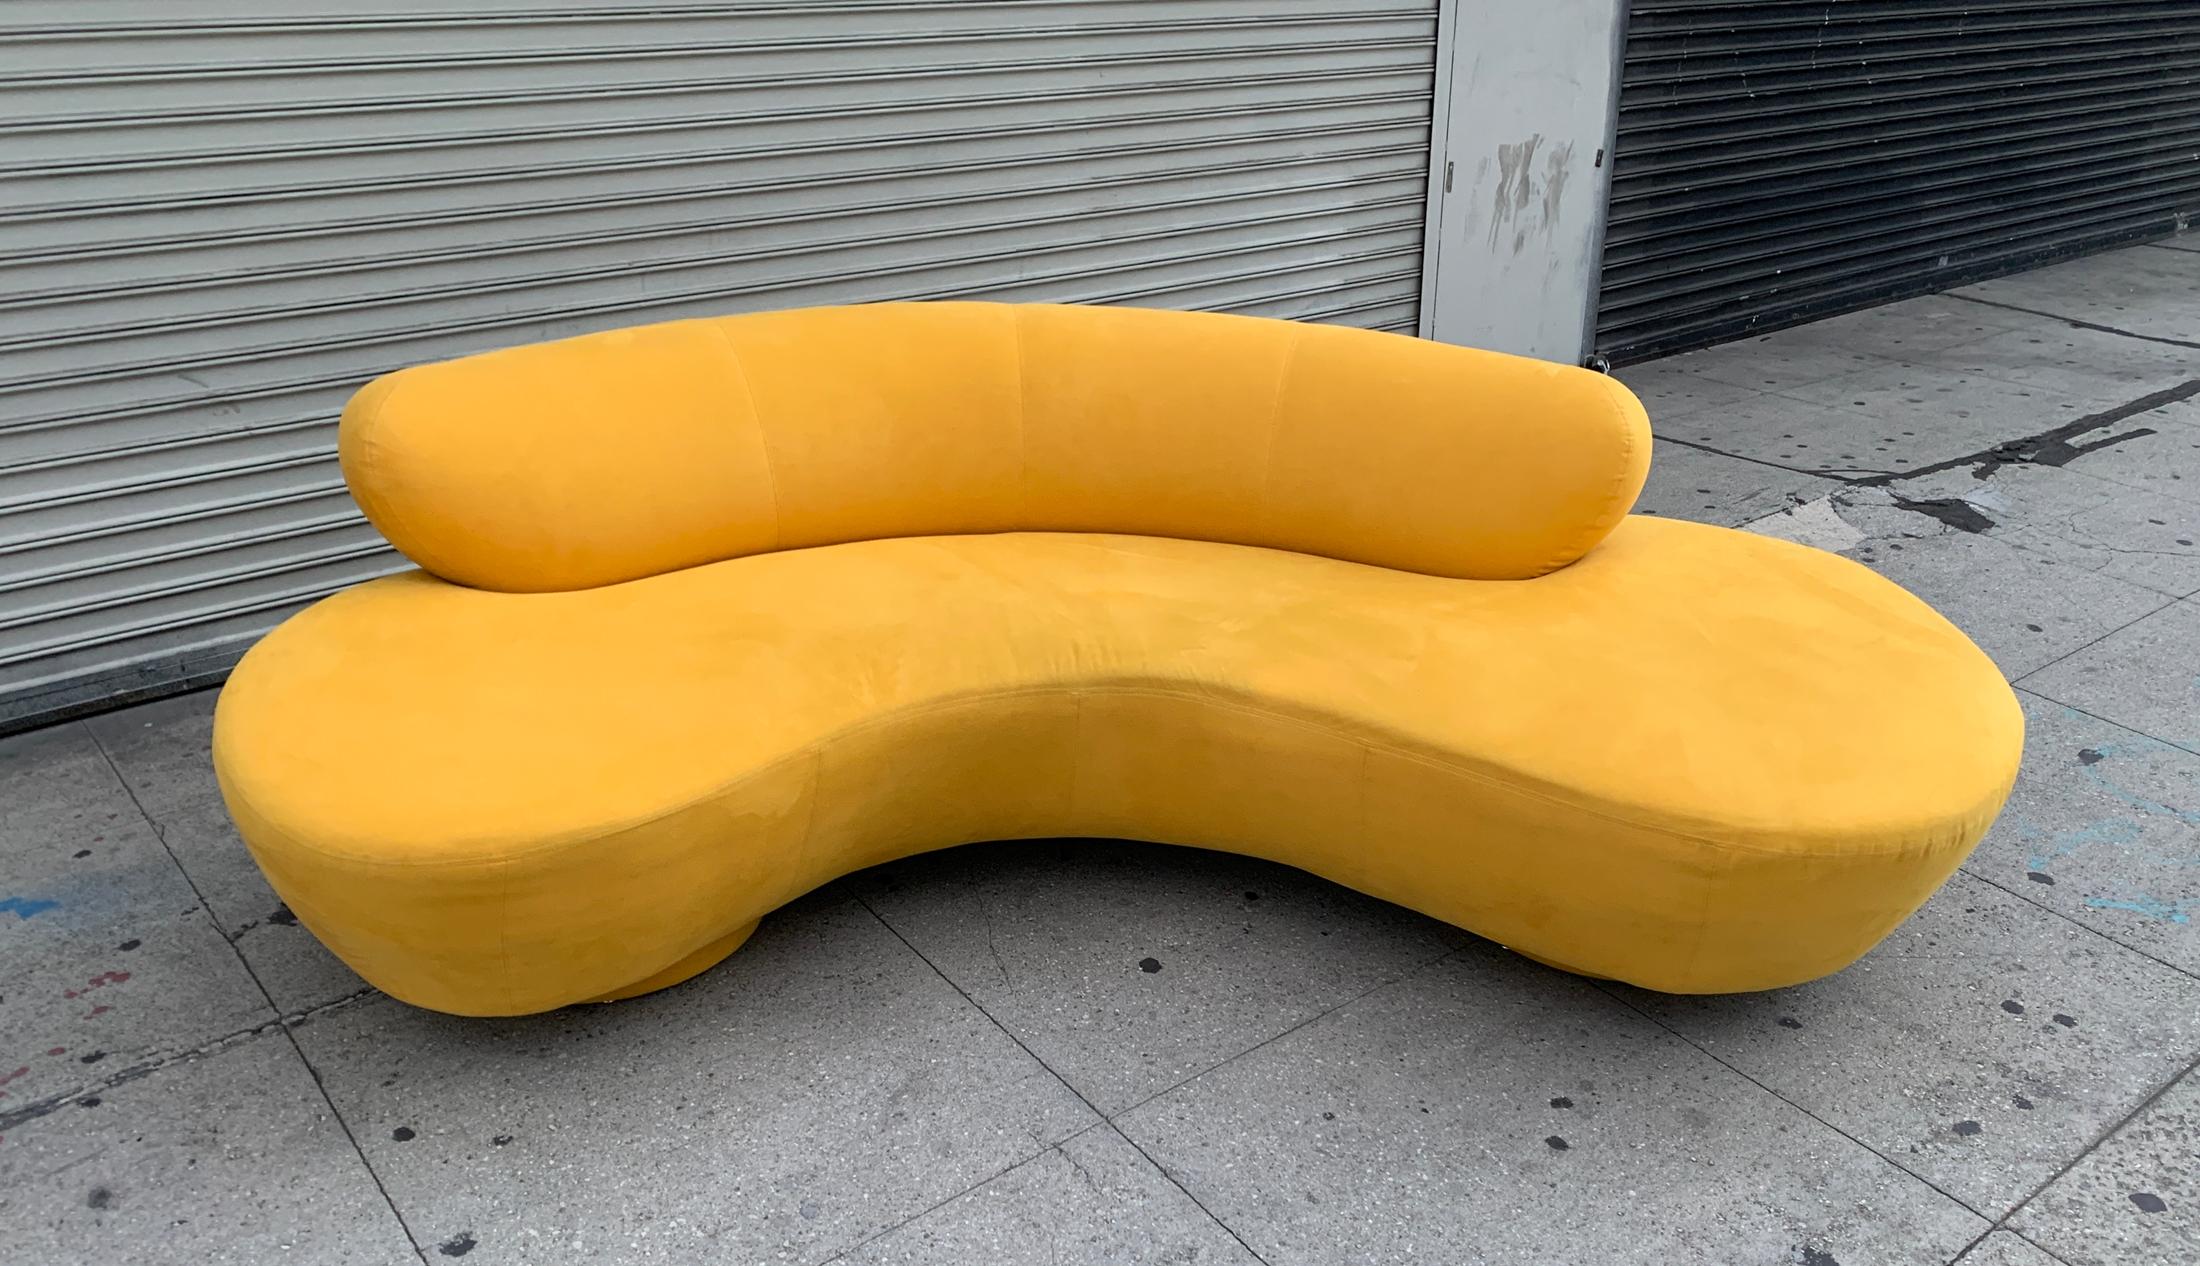 Beautiful Vladimir Kagan serpentine sofa designed in the 1970s and manufactured by Directional.
The sofa retains the original label, the sofa is upholstered in a bright yellow microfiber material, the upholstery is original and is good condition